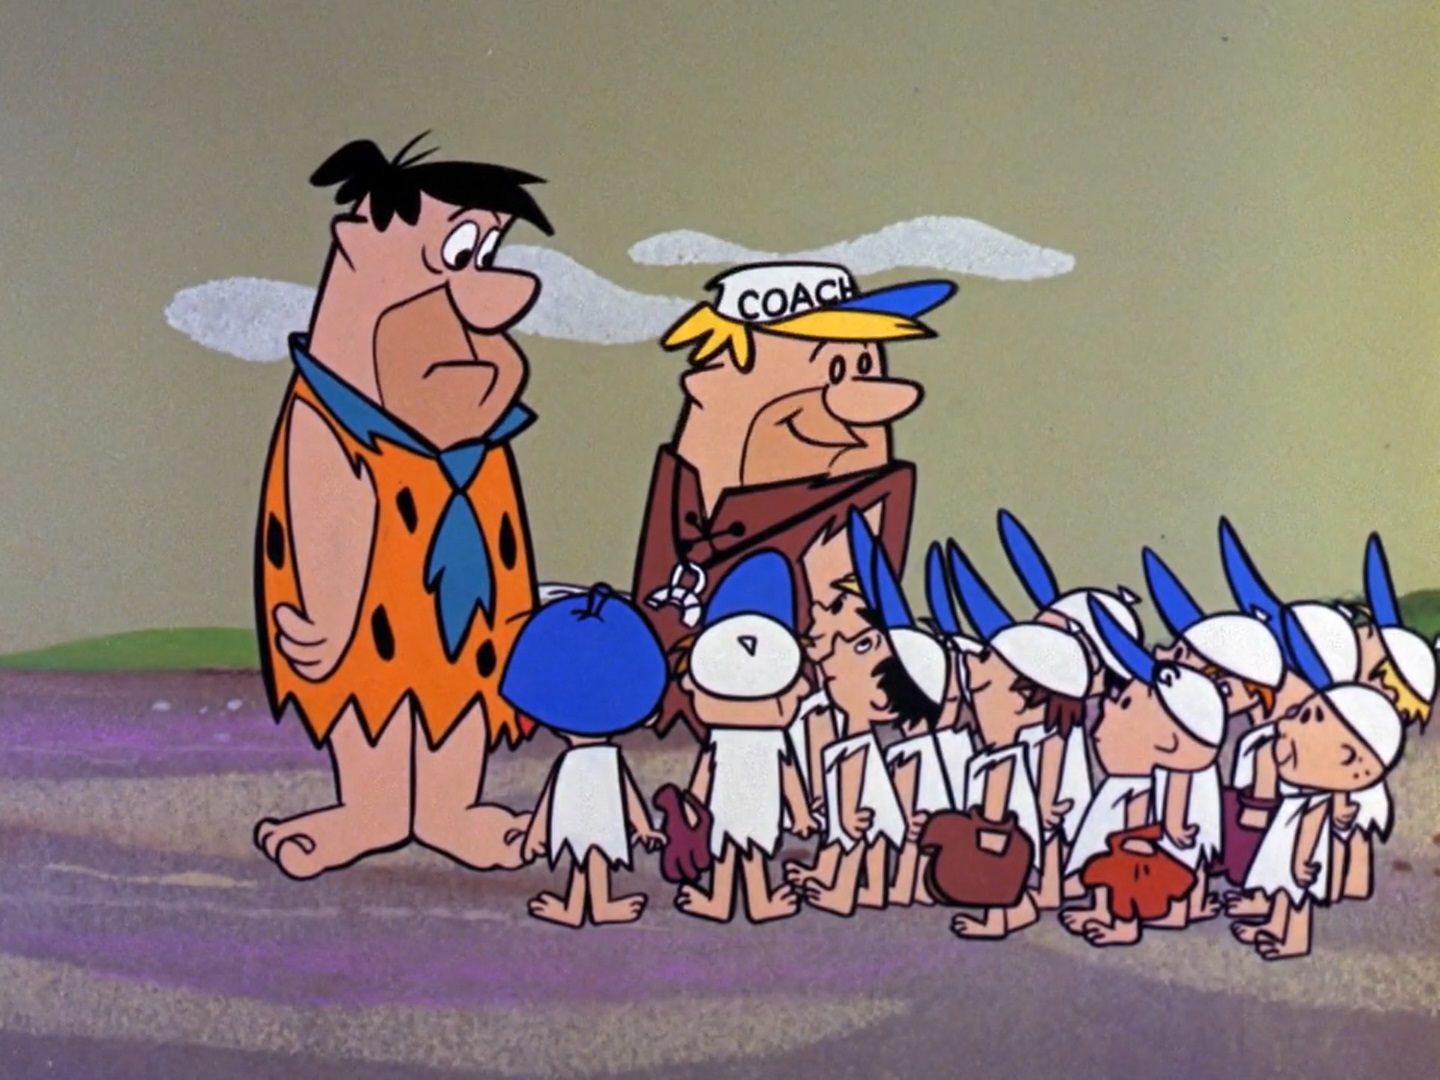 Take Me Out to the Ball Game The Flintstones Fandom image